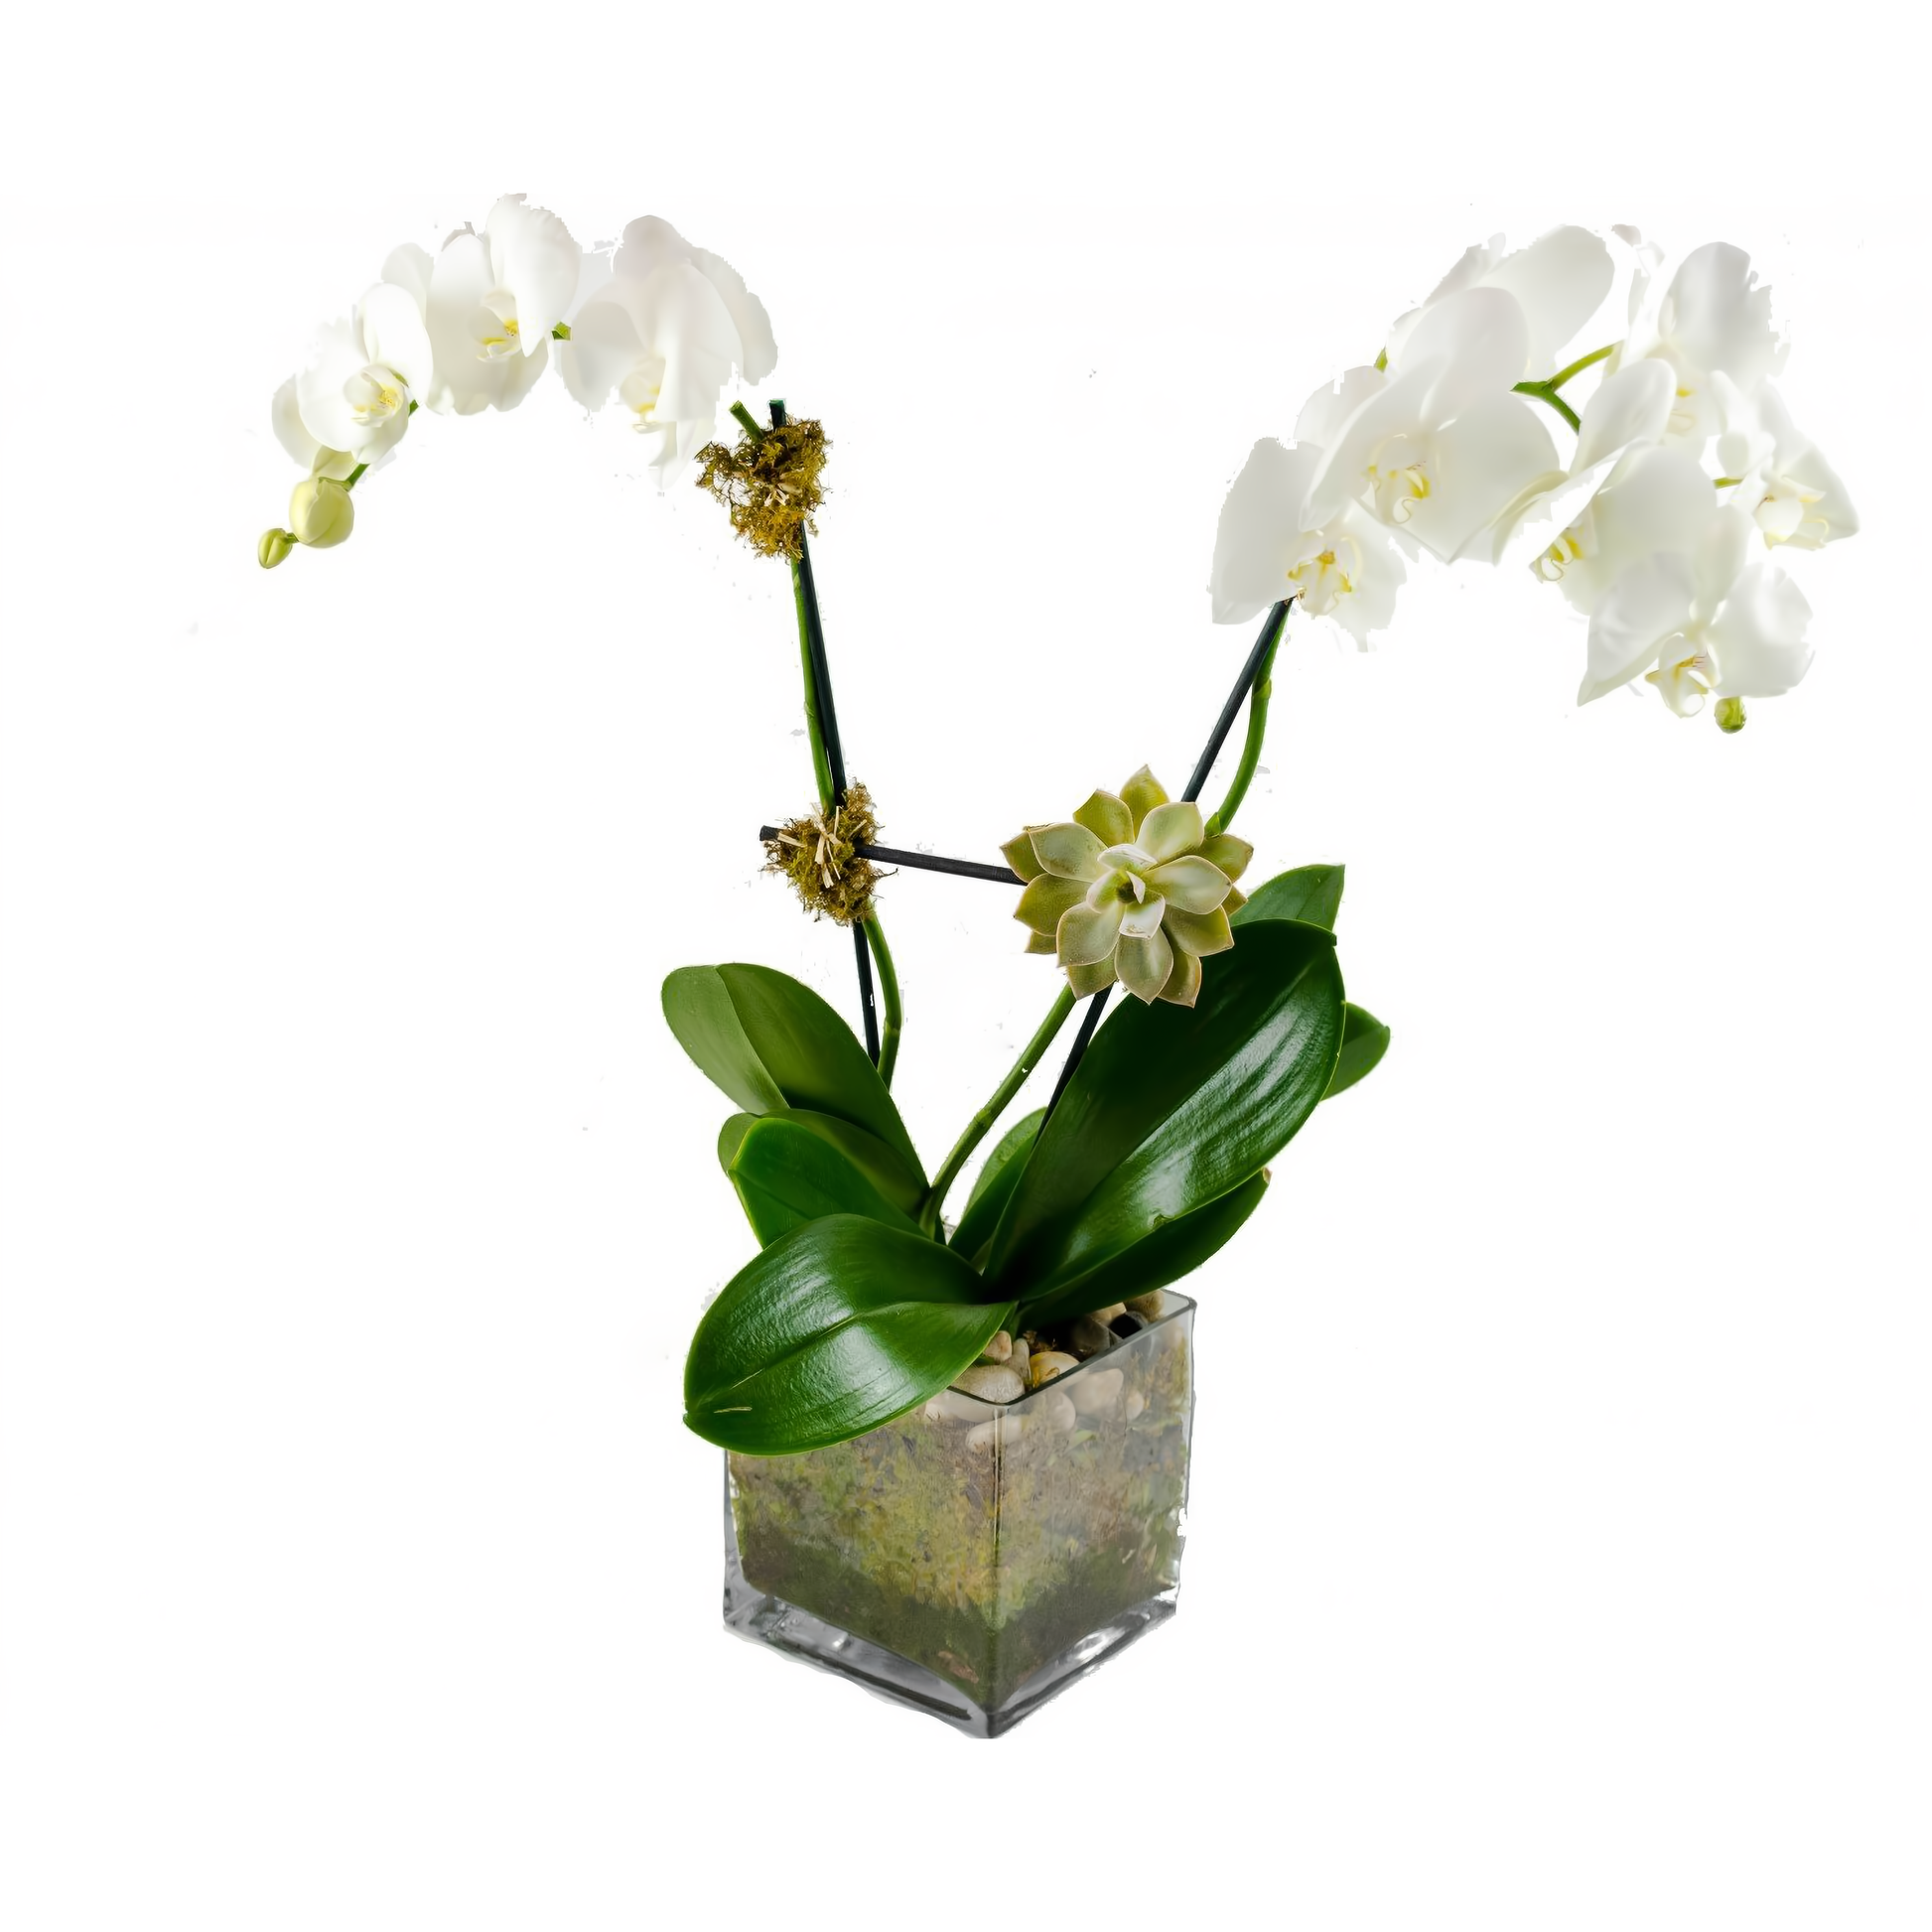 NYC Flower Delivery - Double White Phalaenopsis Orchid w/ Succulent Plant - Plants